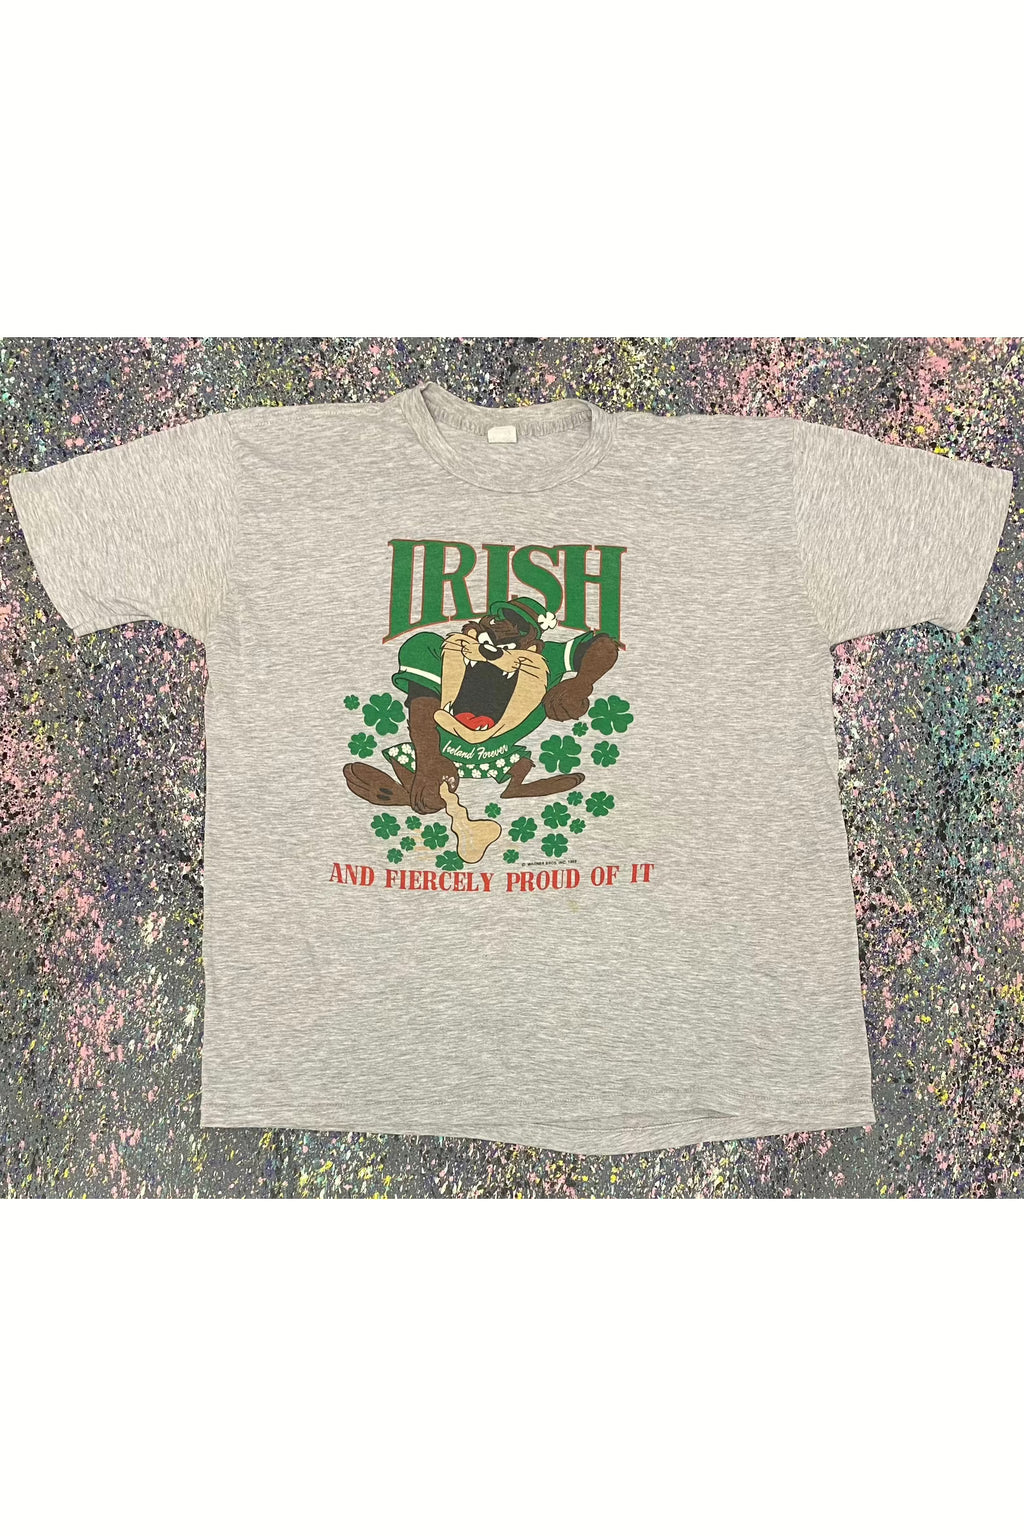 Vintage 1989 Irish and Fiercely Proud of It TAZ Tee- L